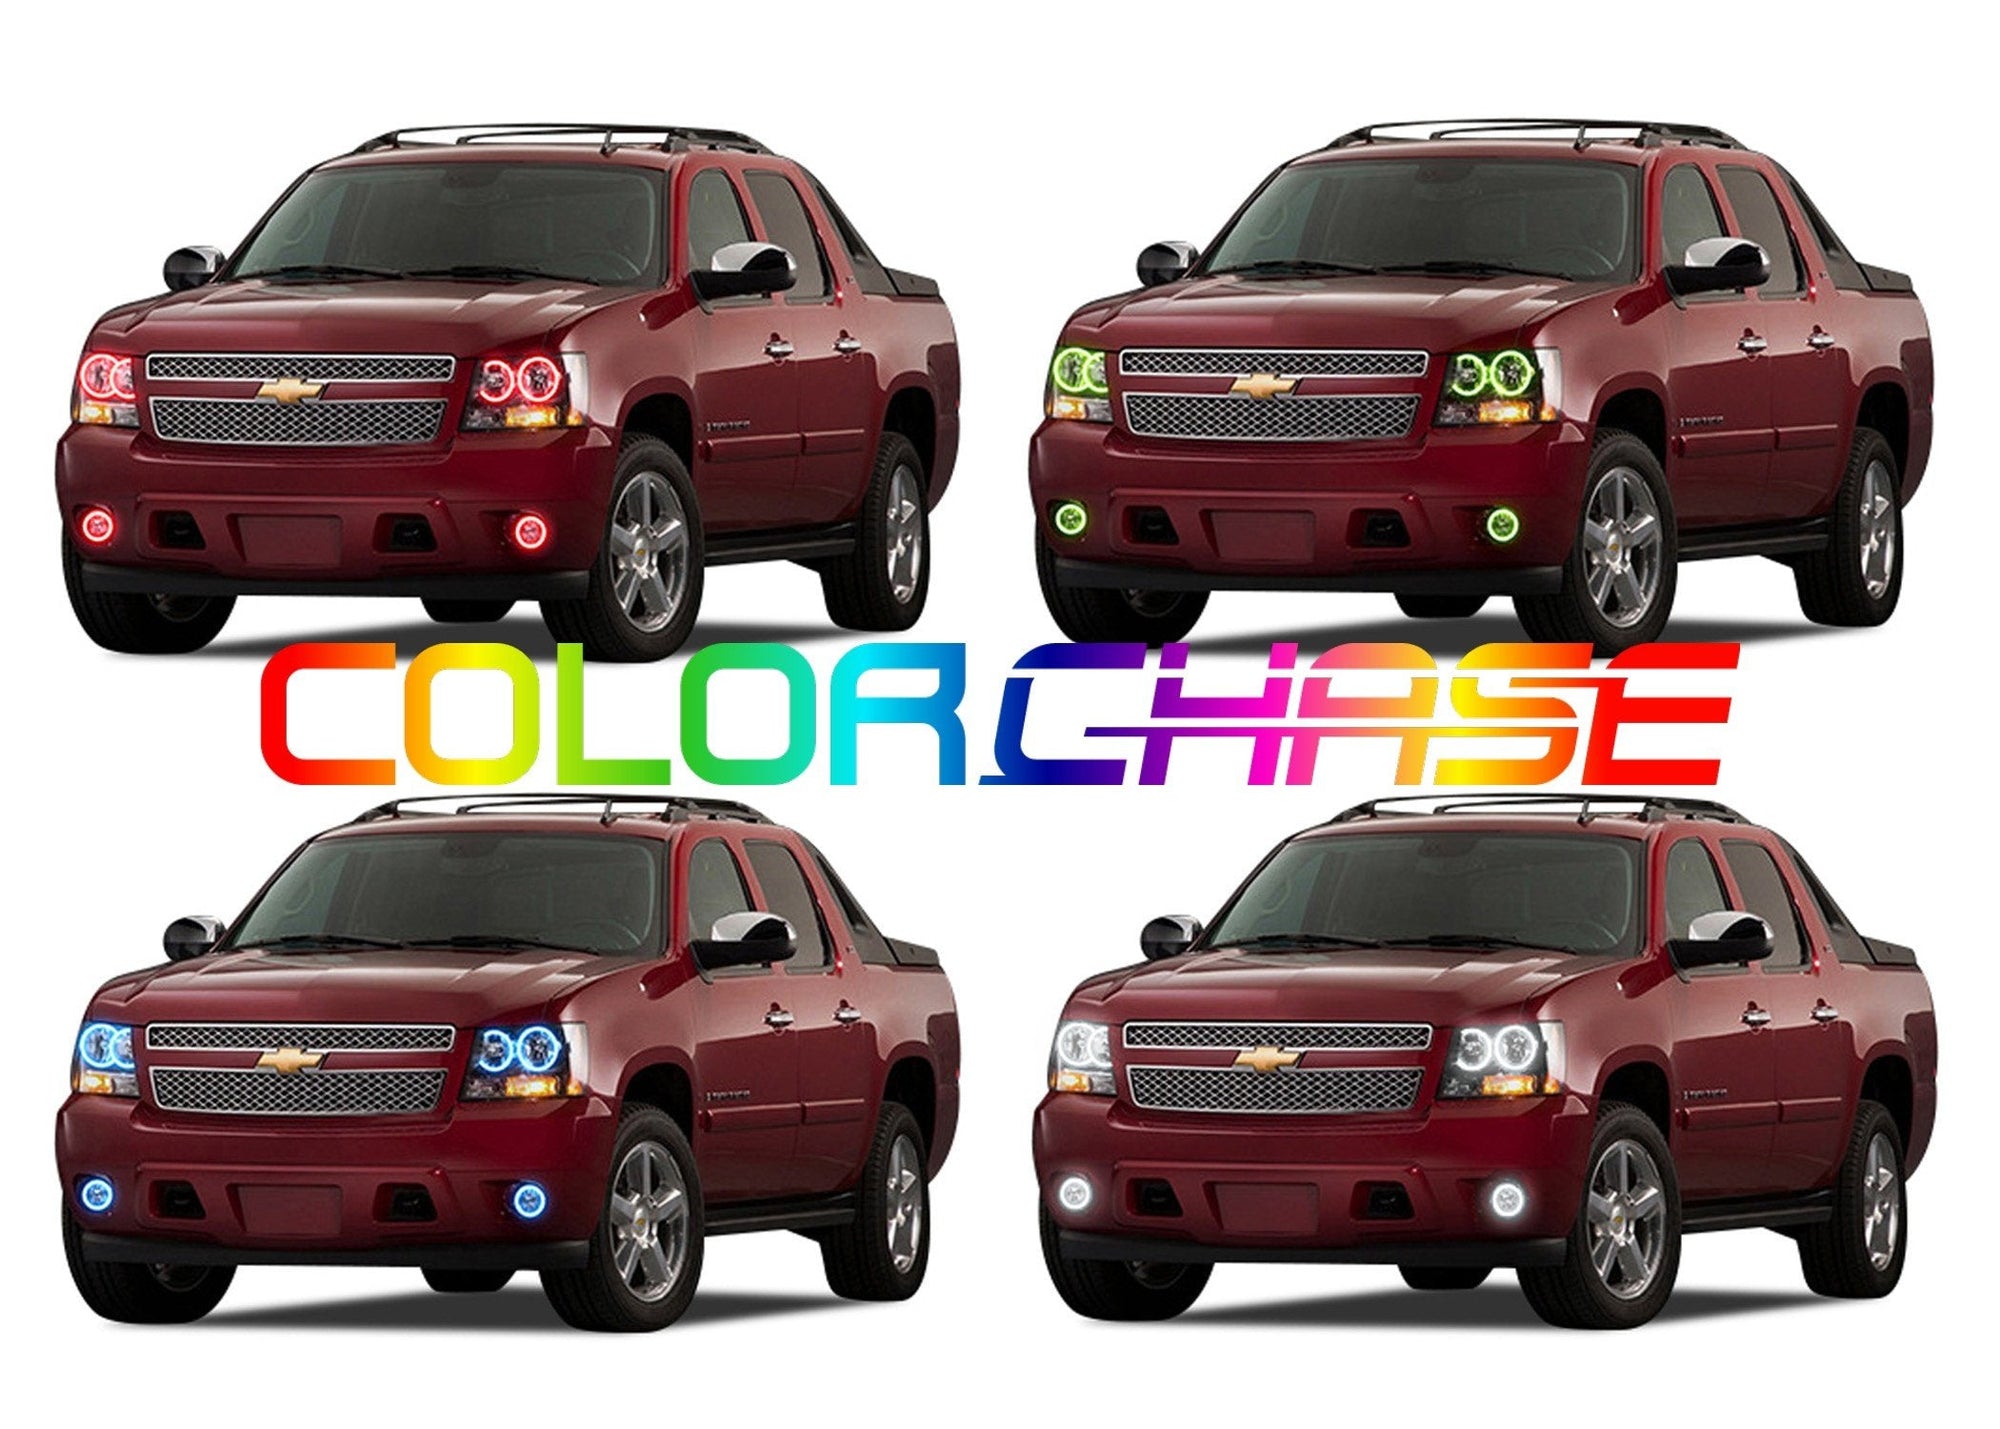 Chevrolet-Avalanche-2007, 2008, 2009, 2010, 2011, 2012, 2013-LED-Halo-Headlights and Fog Lights-ColorChase-No Remote-CY-AV0713-CCHF